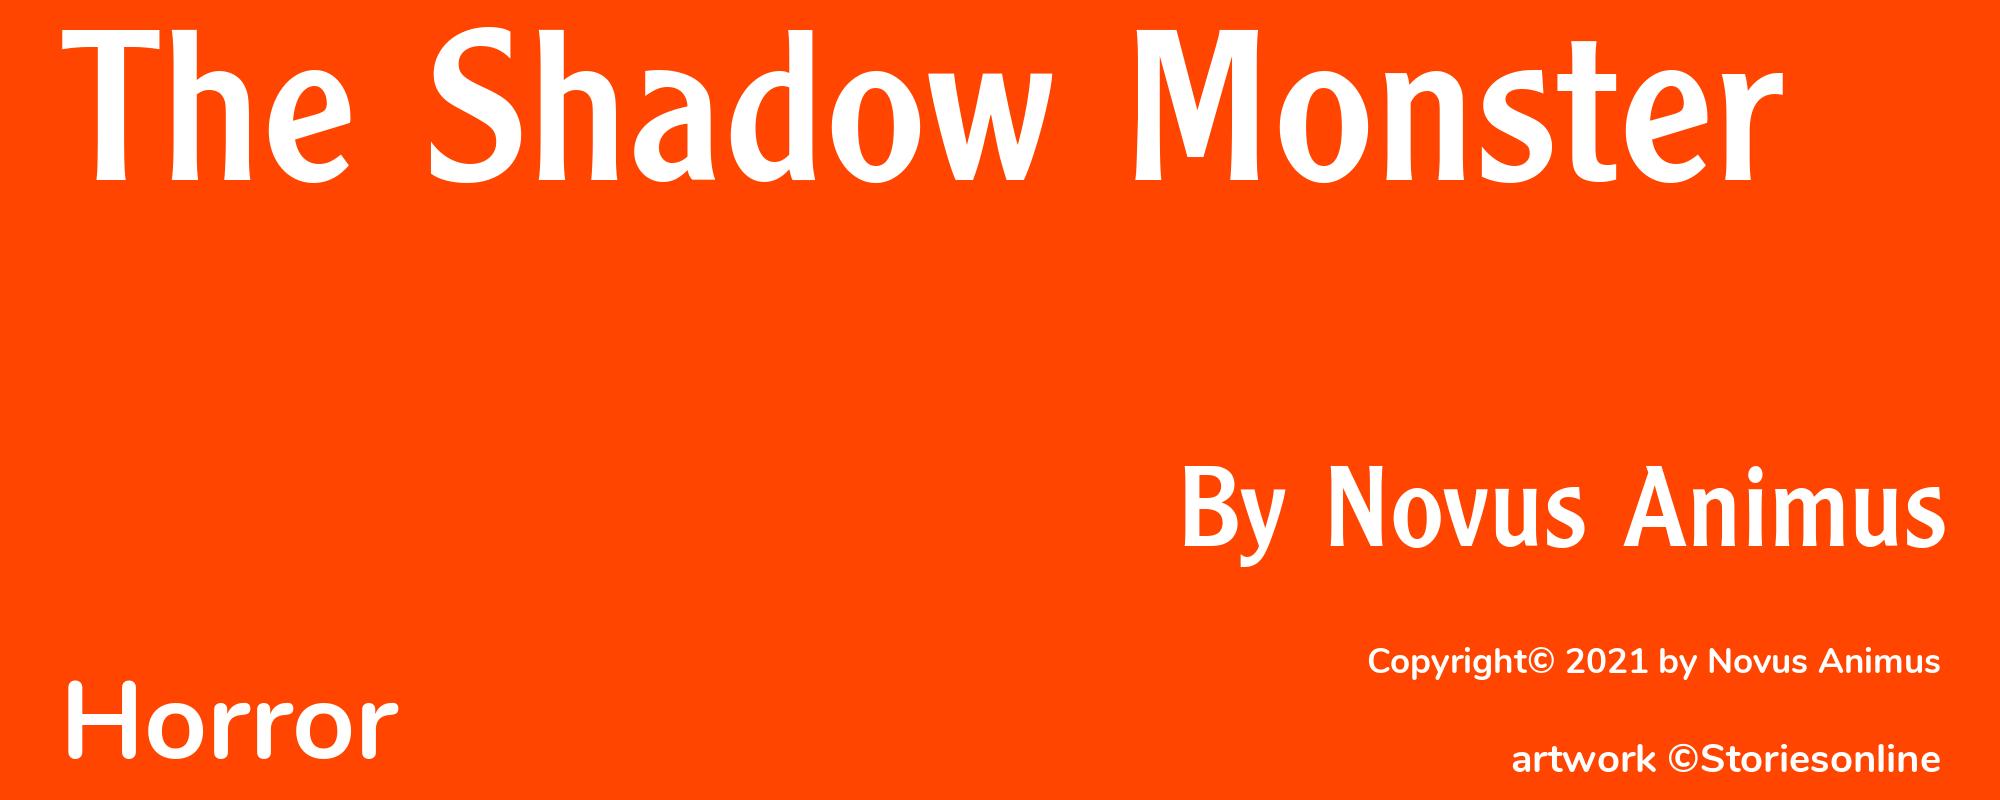 The Shadow Monster - Cover